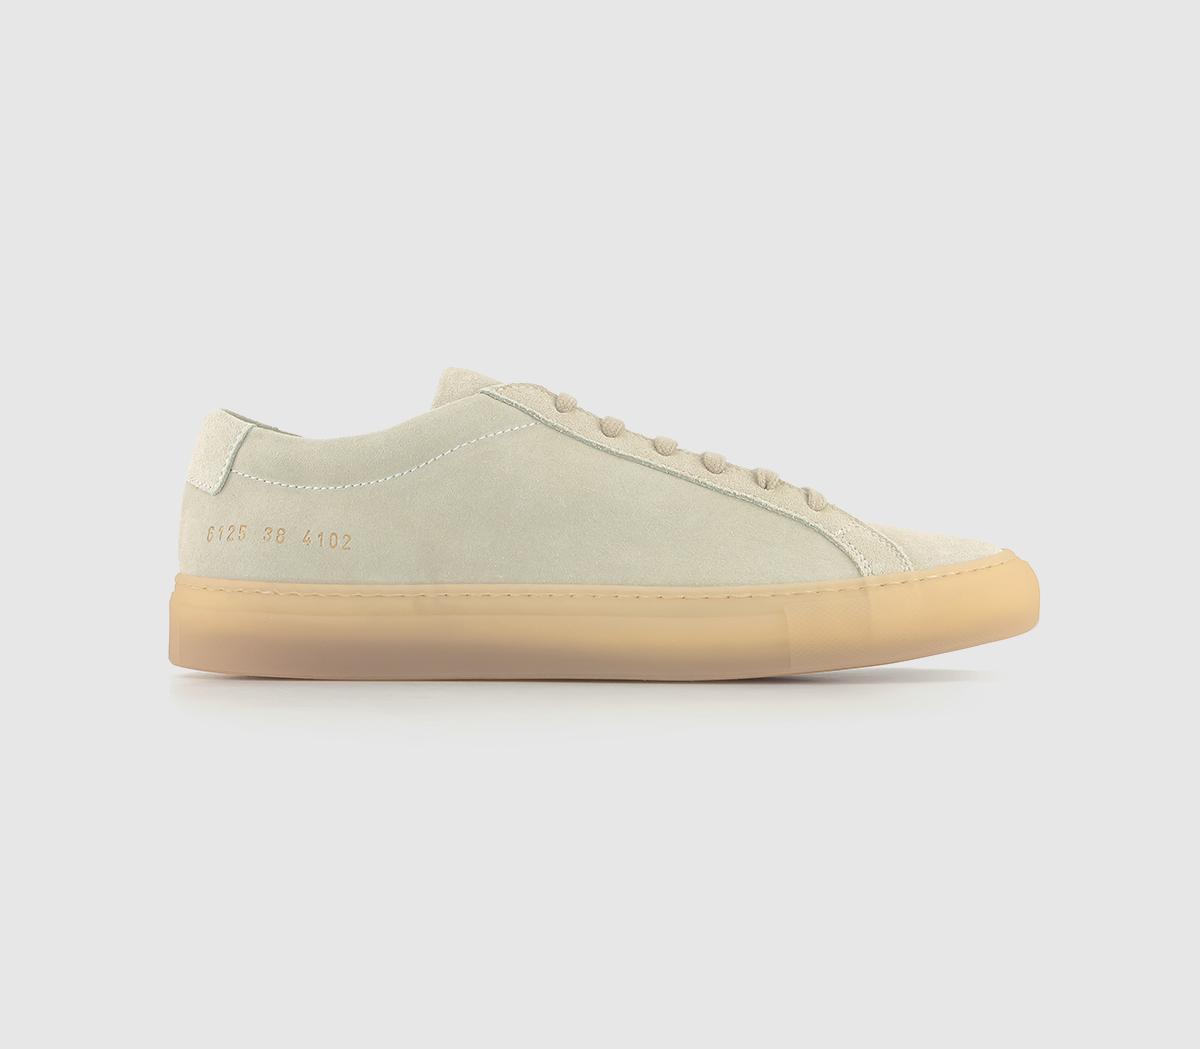 Common ProjectsAchillies Low Trainers WOff White Suede Gum